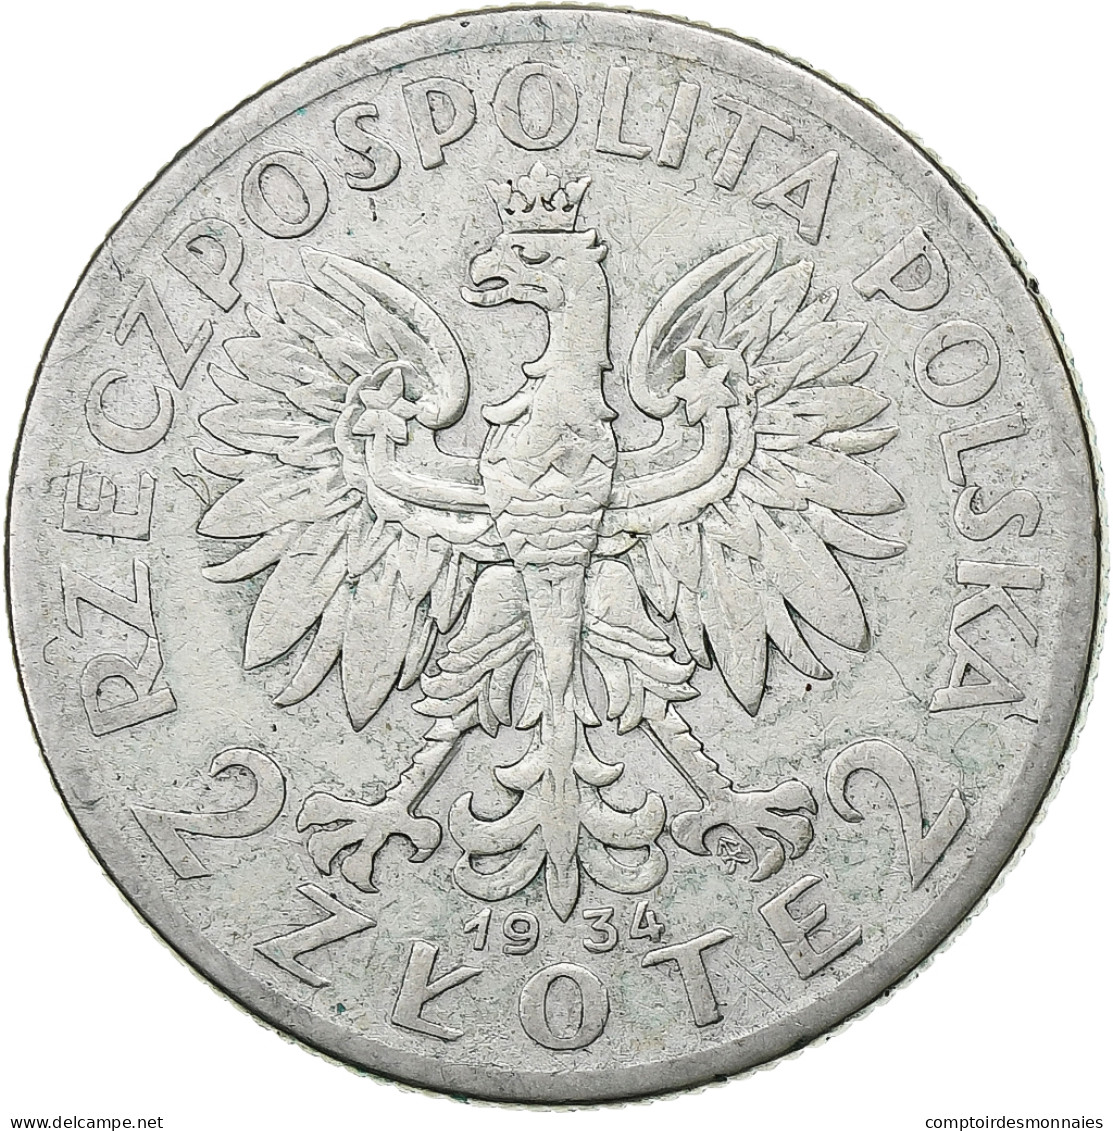 Pologne, 2 Zlote, 1934, Warsaw, TB, Argent, KM:20 - Polonia